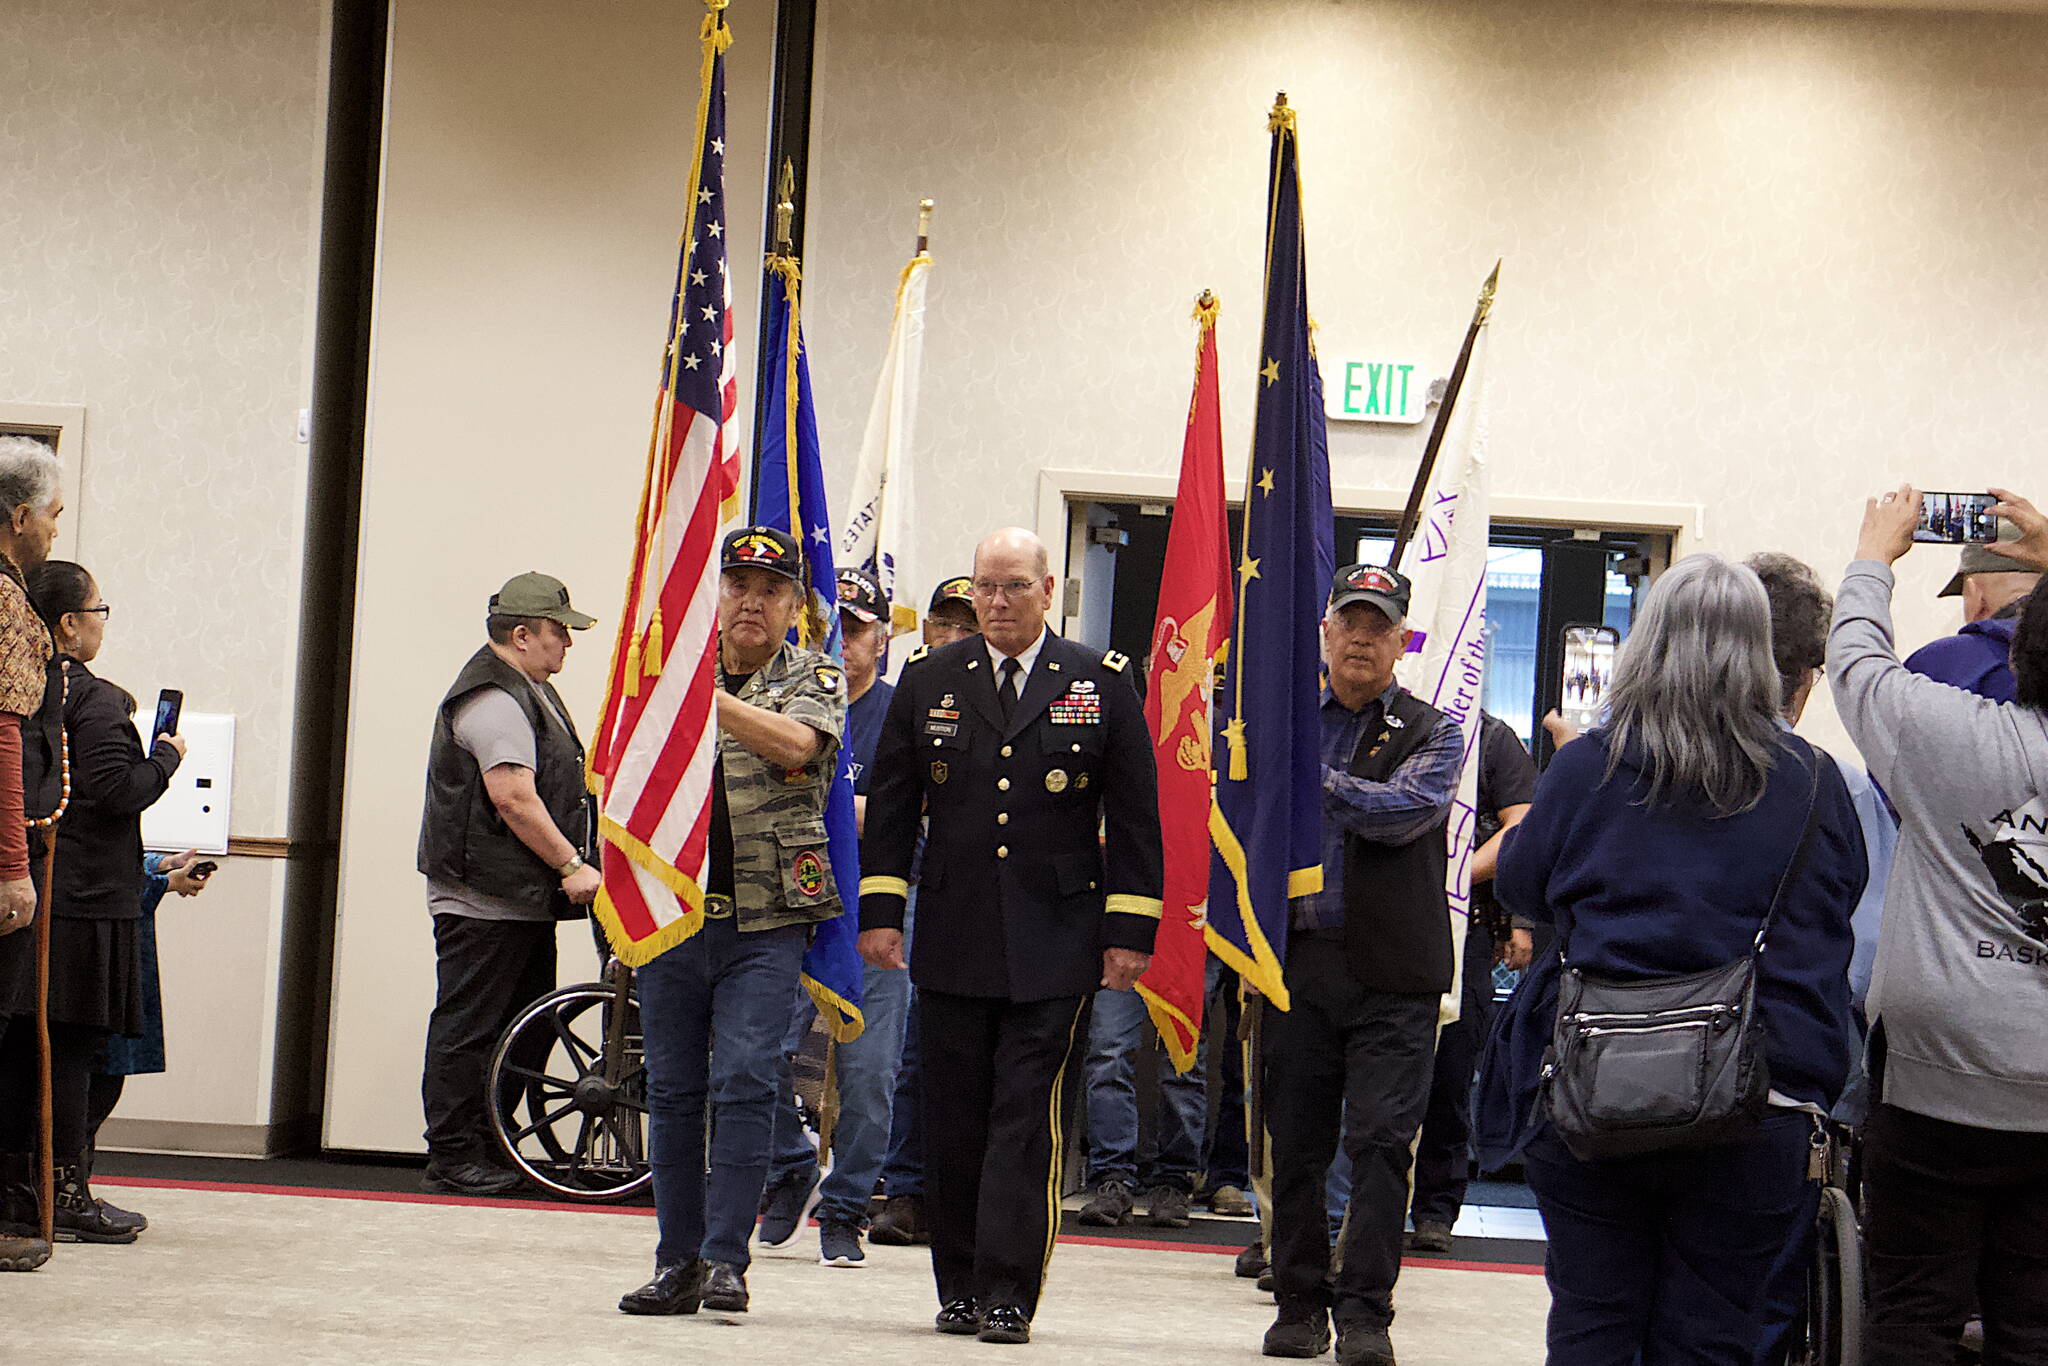 A color guard enters Elizabeth Peratrovich Hall during a Veterans Day celebration on Saturday hosted by Southeast Alaska Native Veterans. (Mark Sabbatini / Juneau Empire)